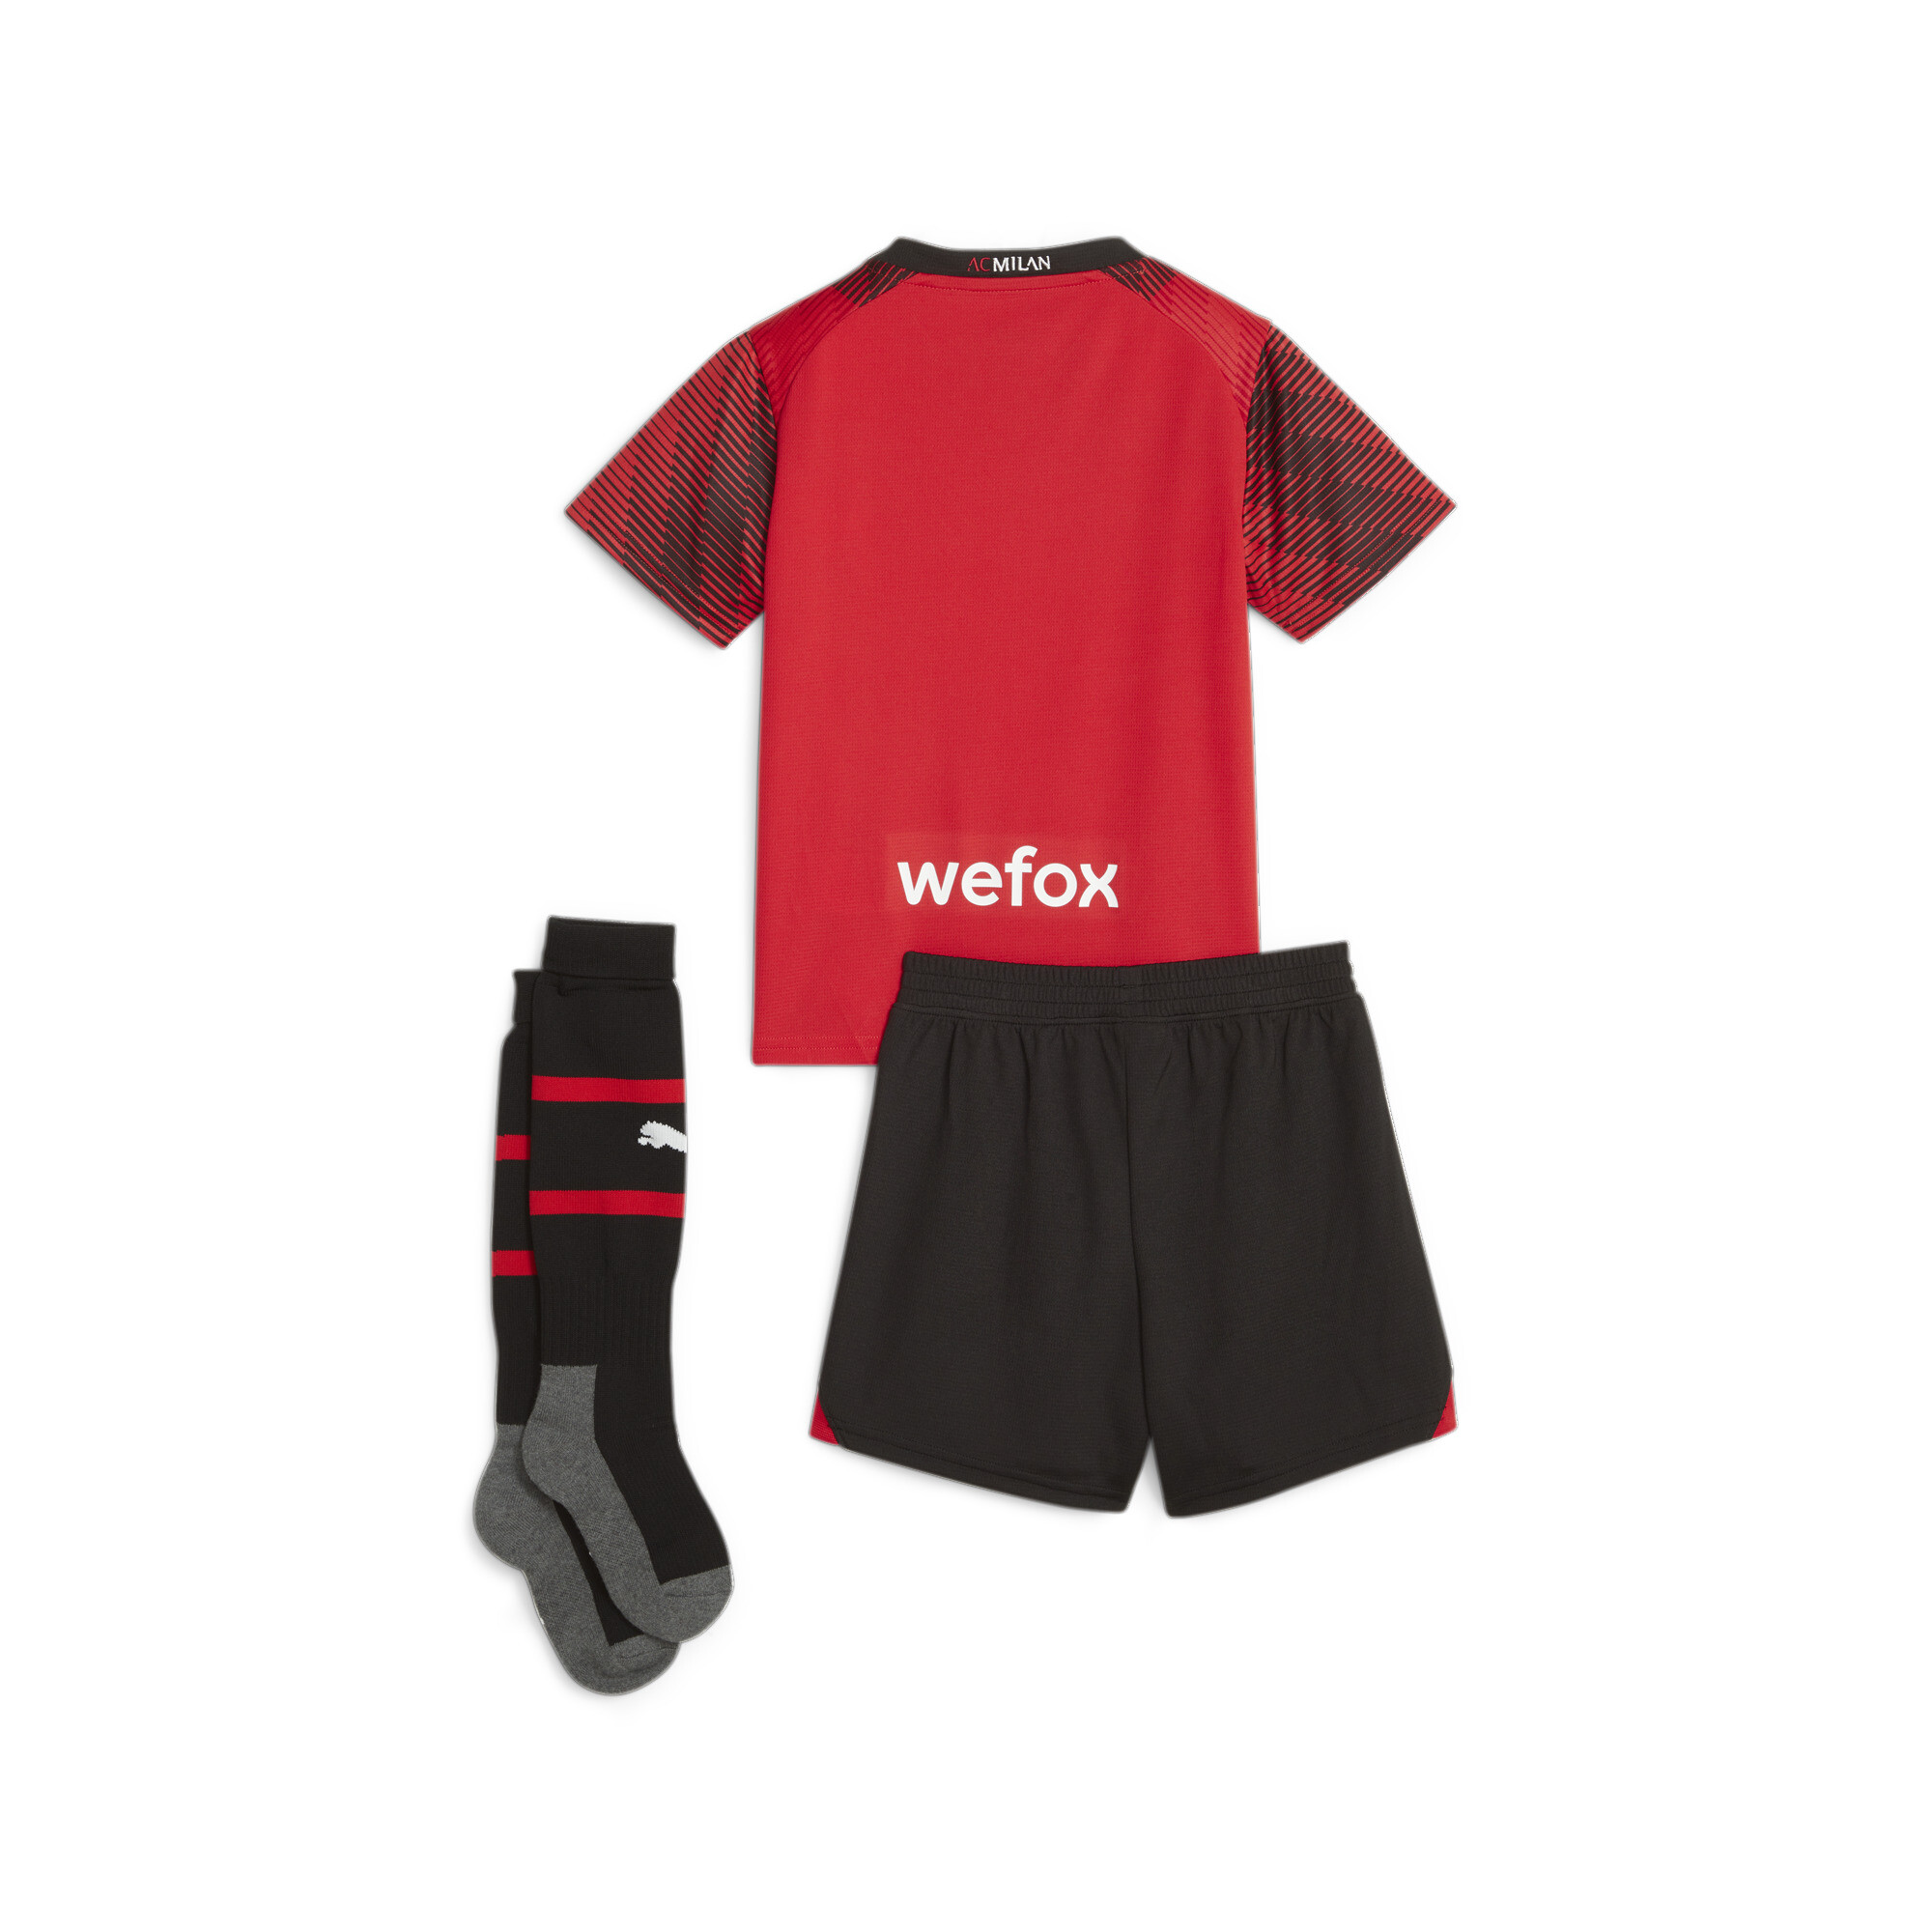 Puma A.C. Milan 23/24 Home Mini Kit, Red, Size 5-6Y, Clothing